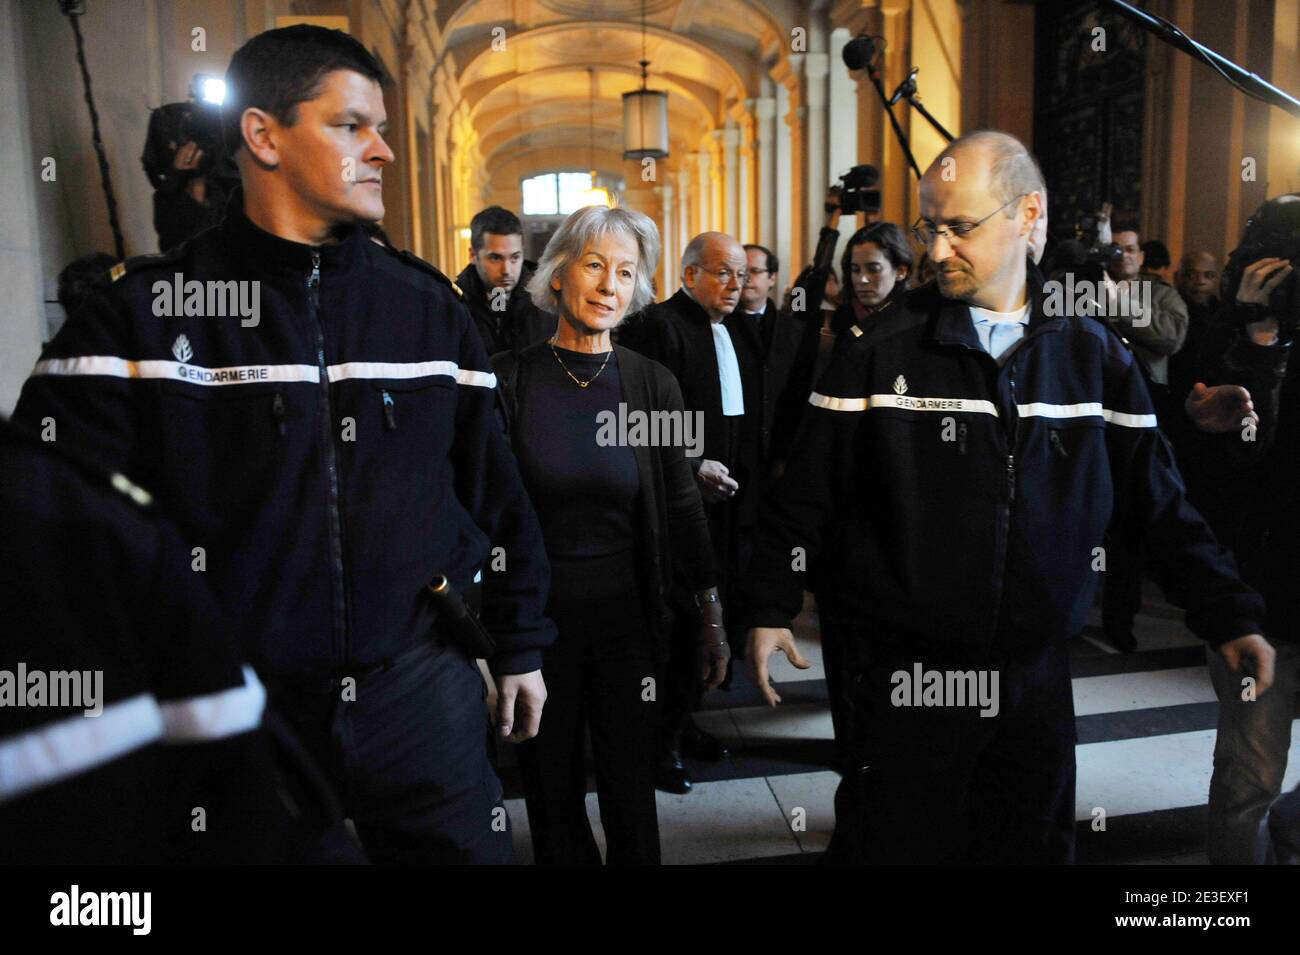 Widow of late Prefect Erignac, Dominique Erignac leaving the Paris courthouse to attend the Yvan Colonna Trial, in Paris, France, on January 9, 2009. Photo by Mousse/ABACAPRESS.COM Stock Photo